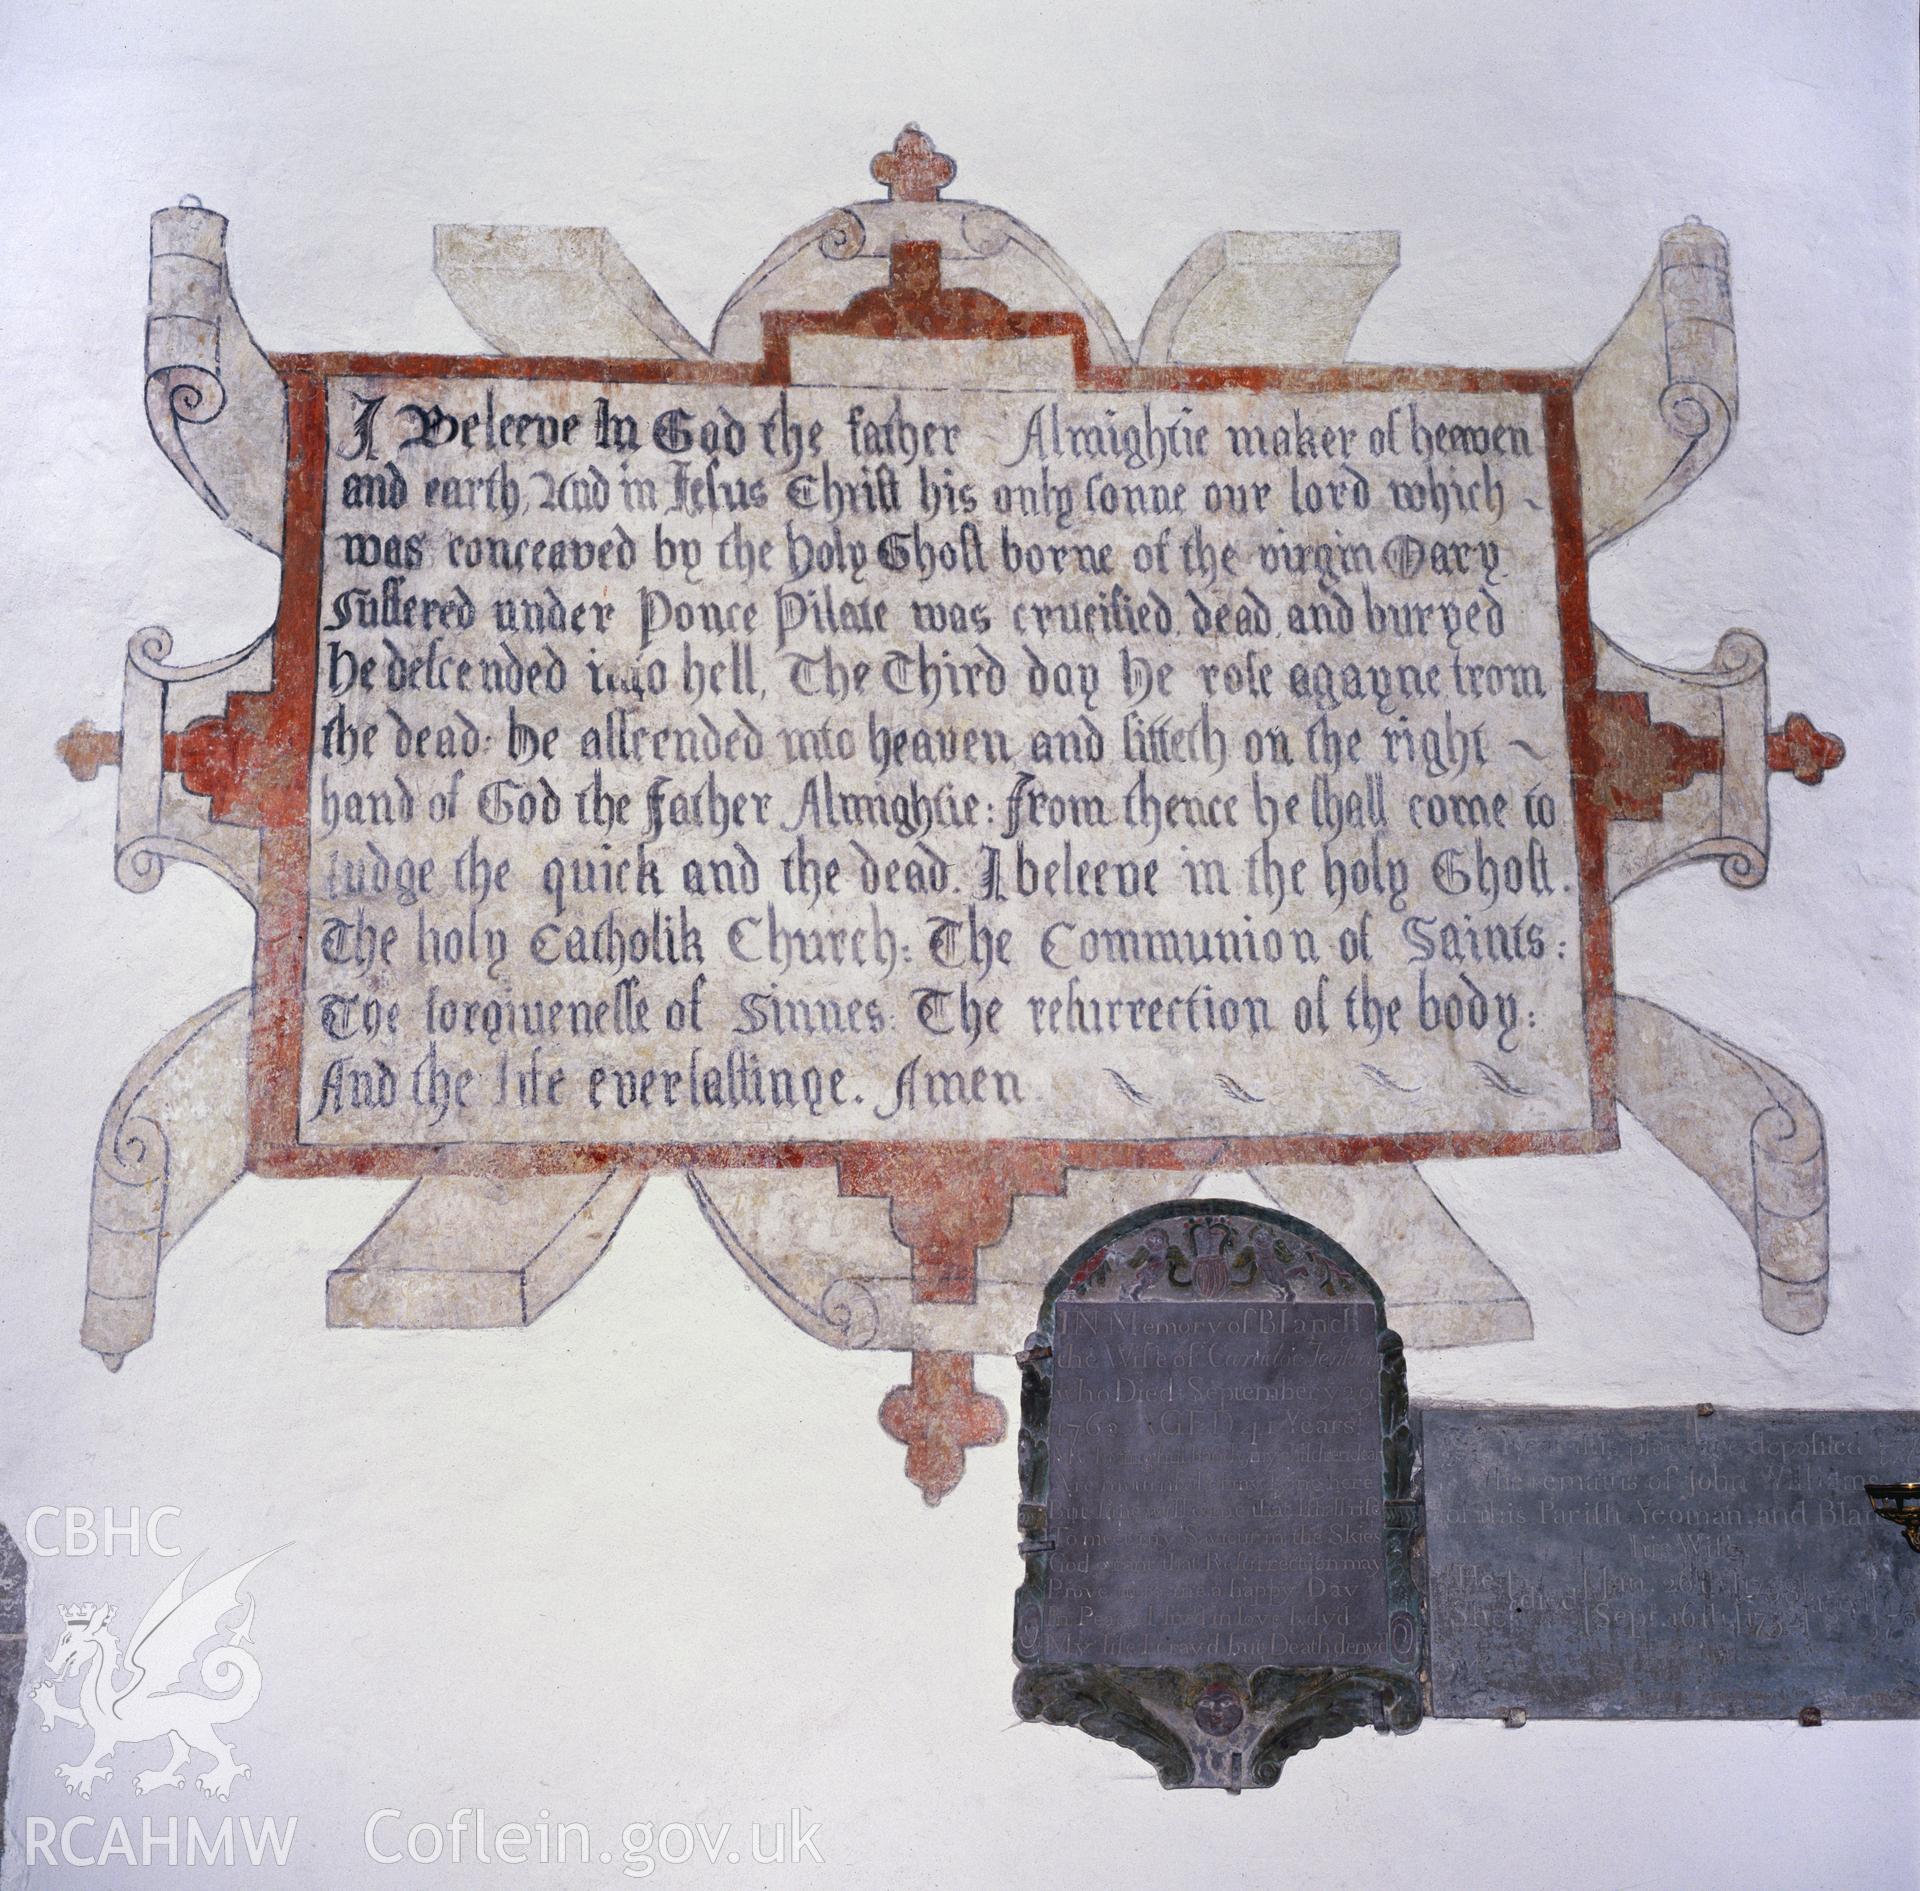 RCAHMW colour transparency showing a wallpainting in St Cybis Church, Llangybi, taken by RCAHMW